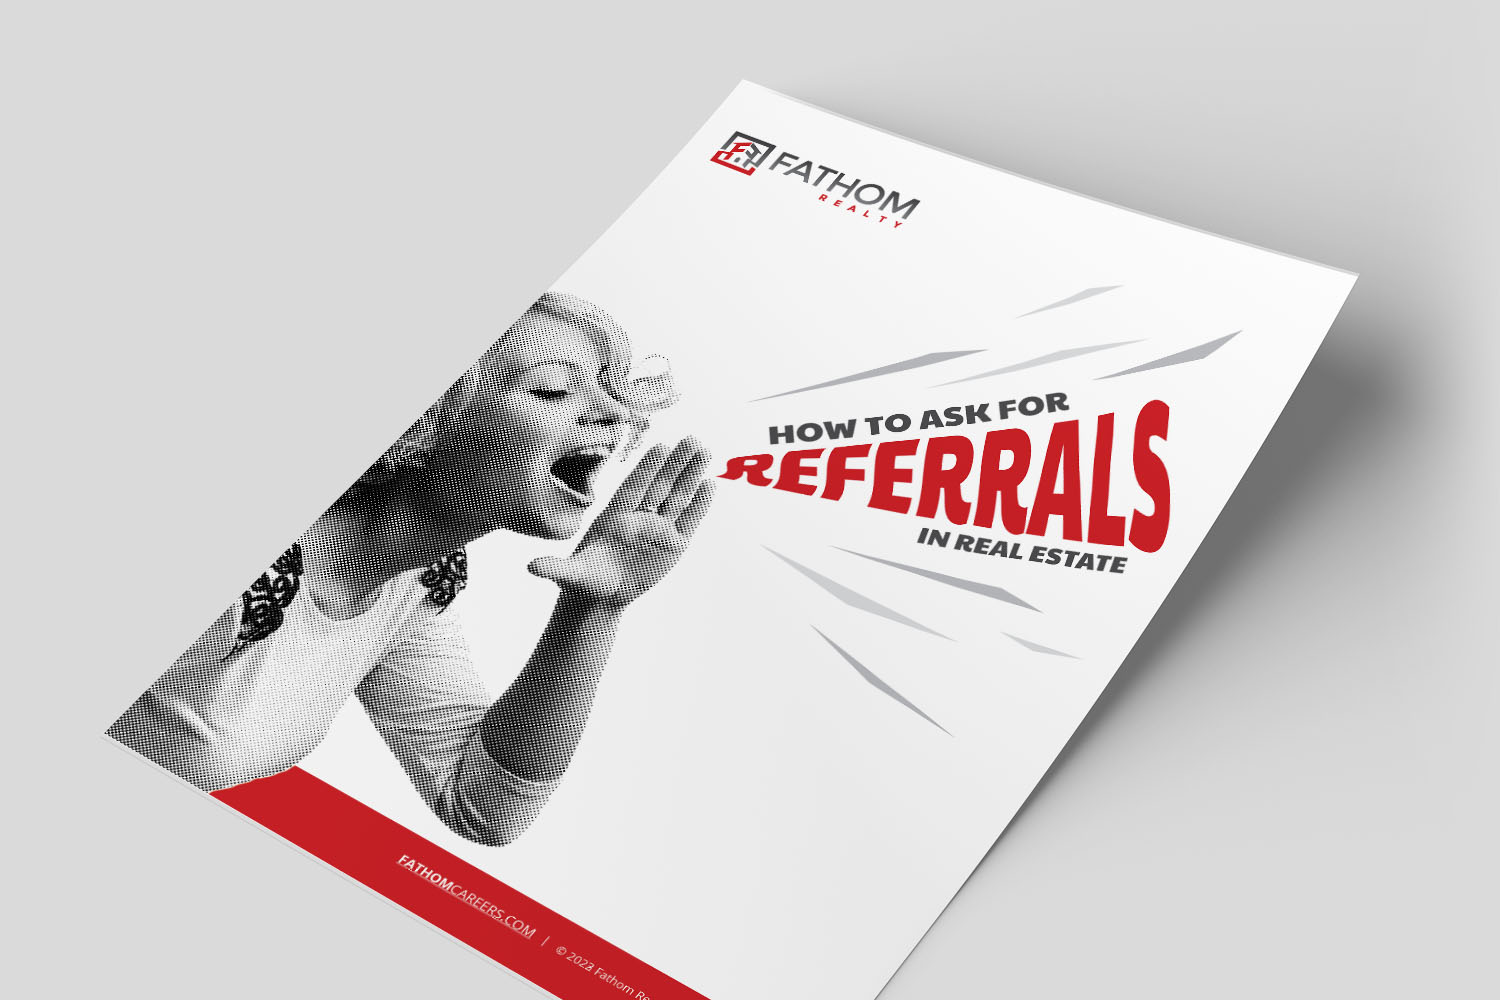 How to Ask for Referrals in Real Estate